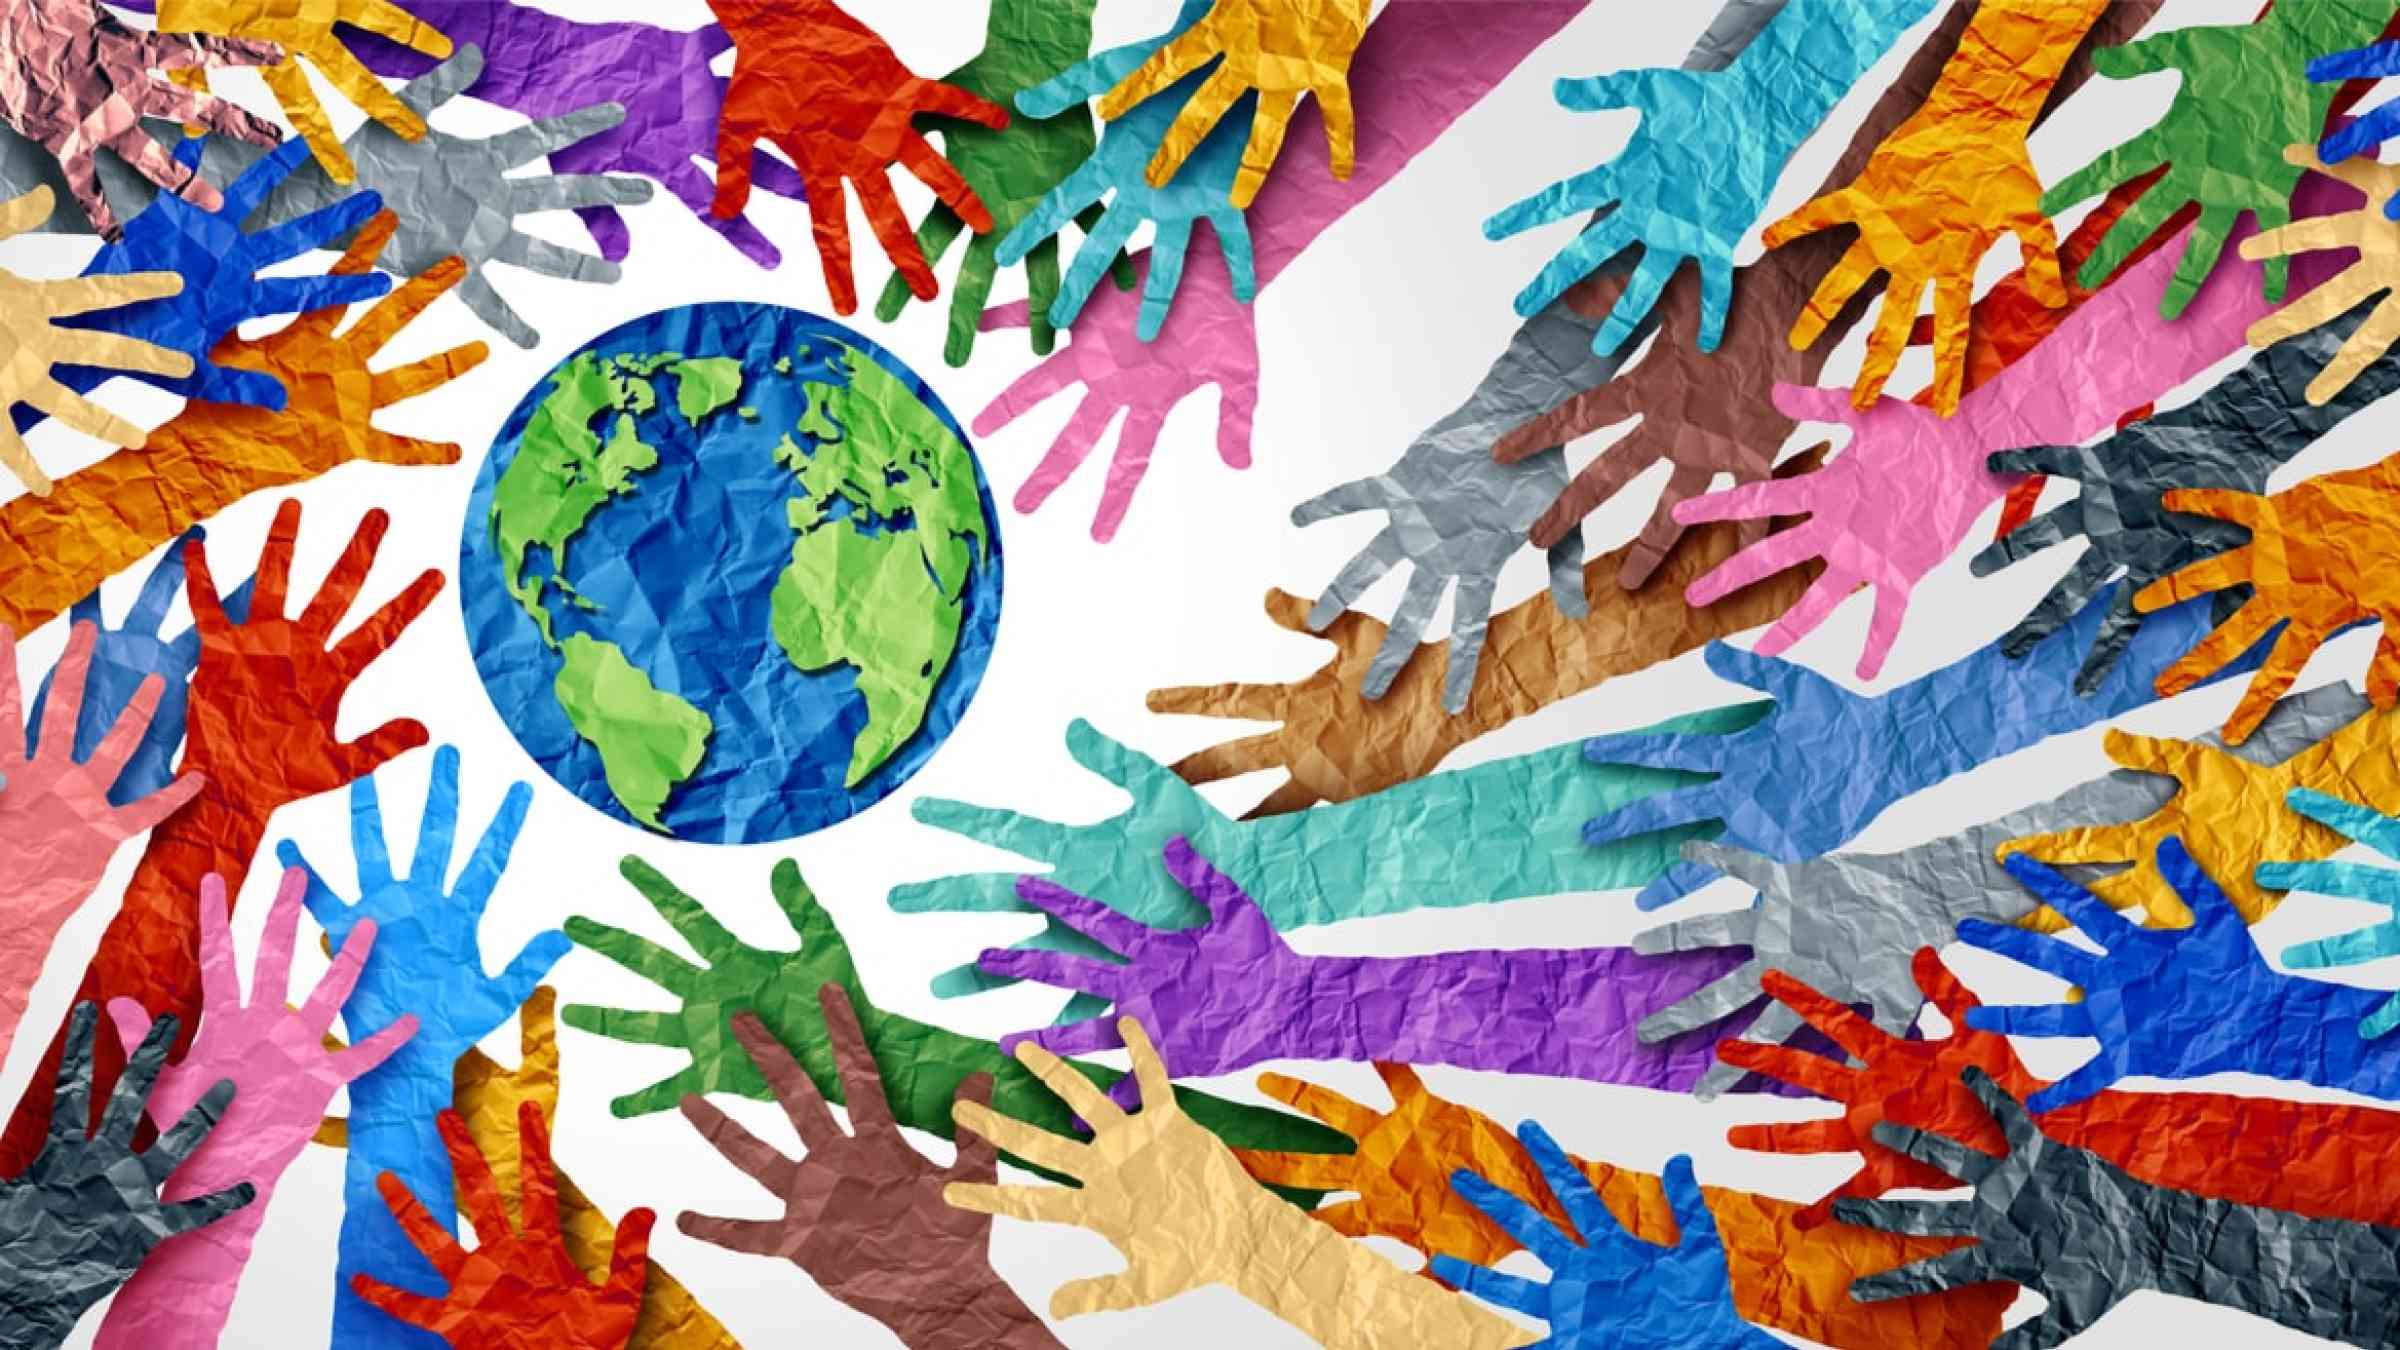 Image portraying world diversity with many different coloured hands